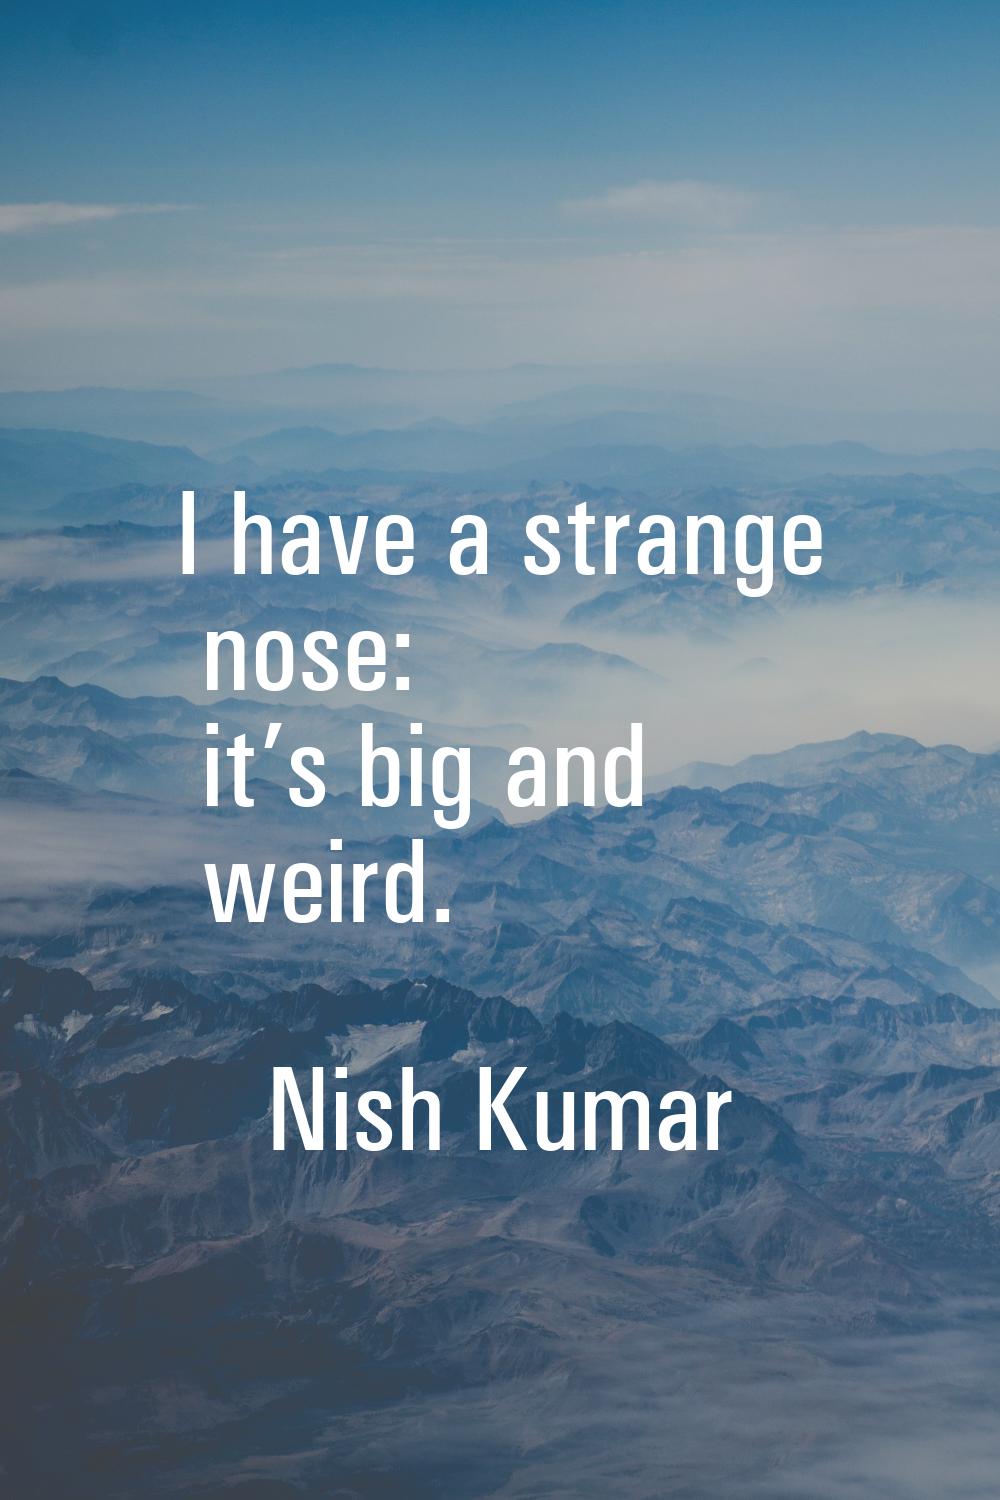 I have a strange nose: it’s big and weird.